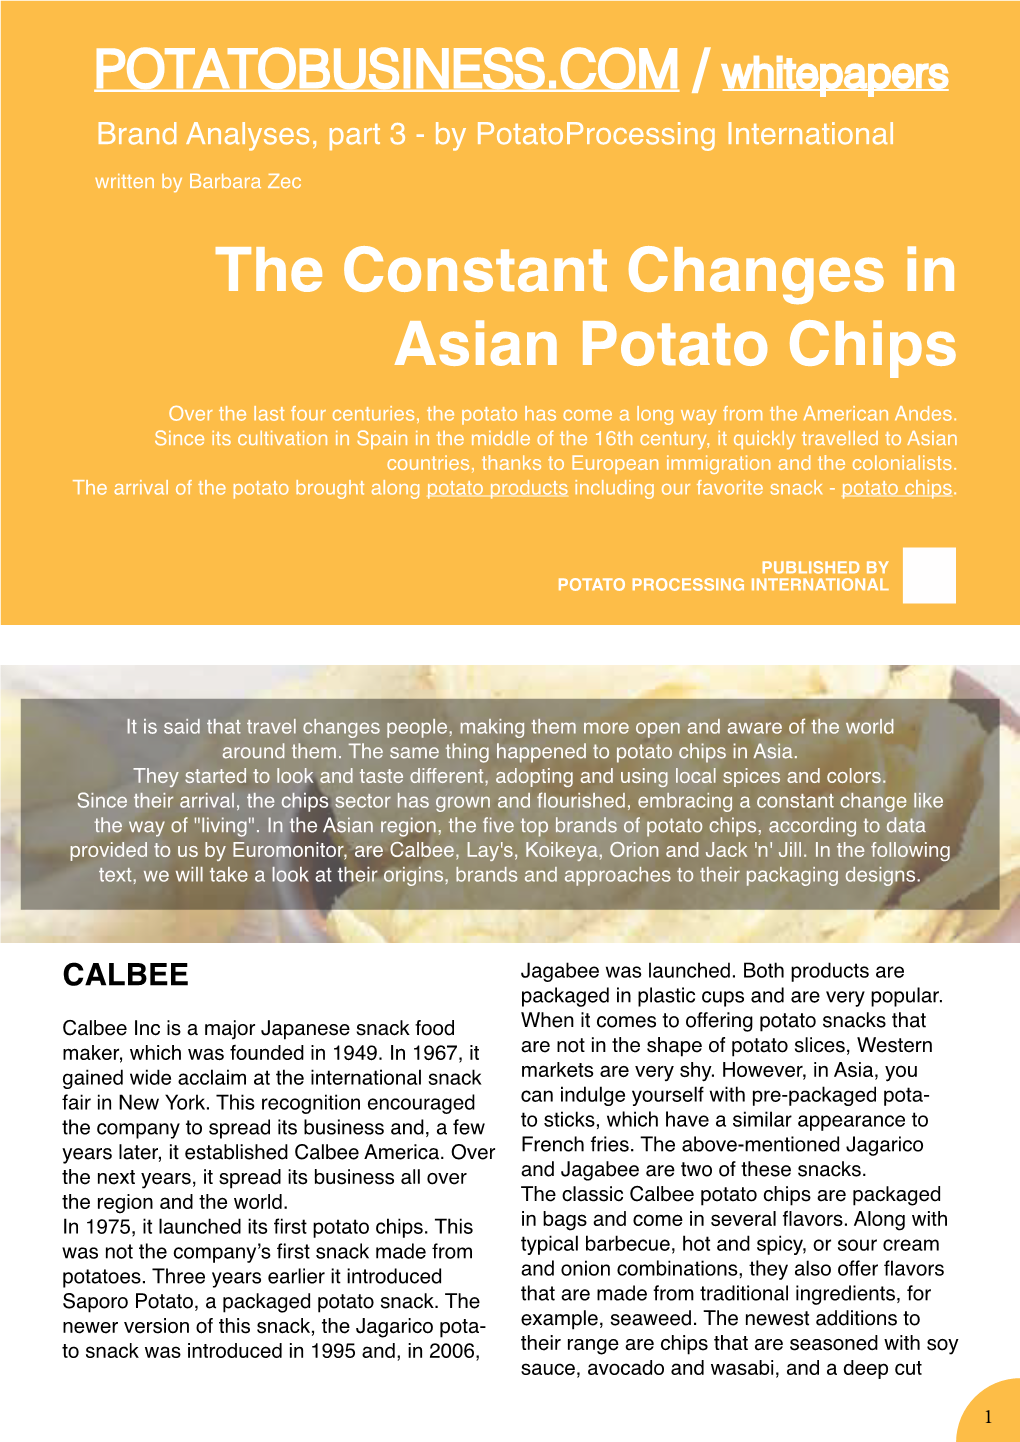 The Constant Changes in Asian Potato Chips Over the Last Four Centuries, the Potato Has Come a Long Way from the American Andes